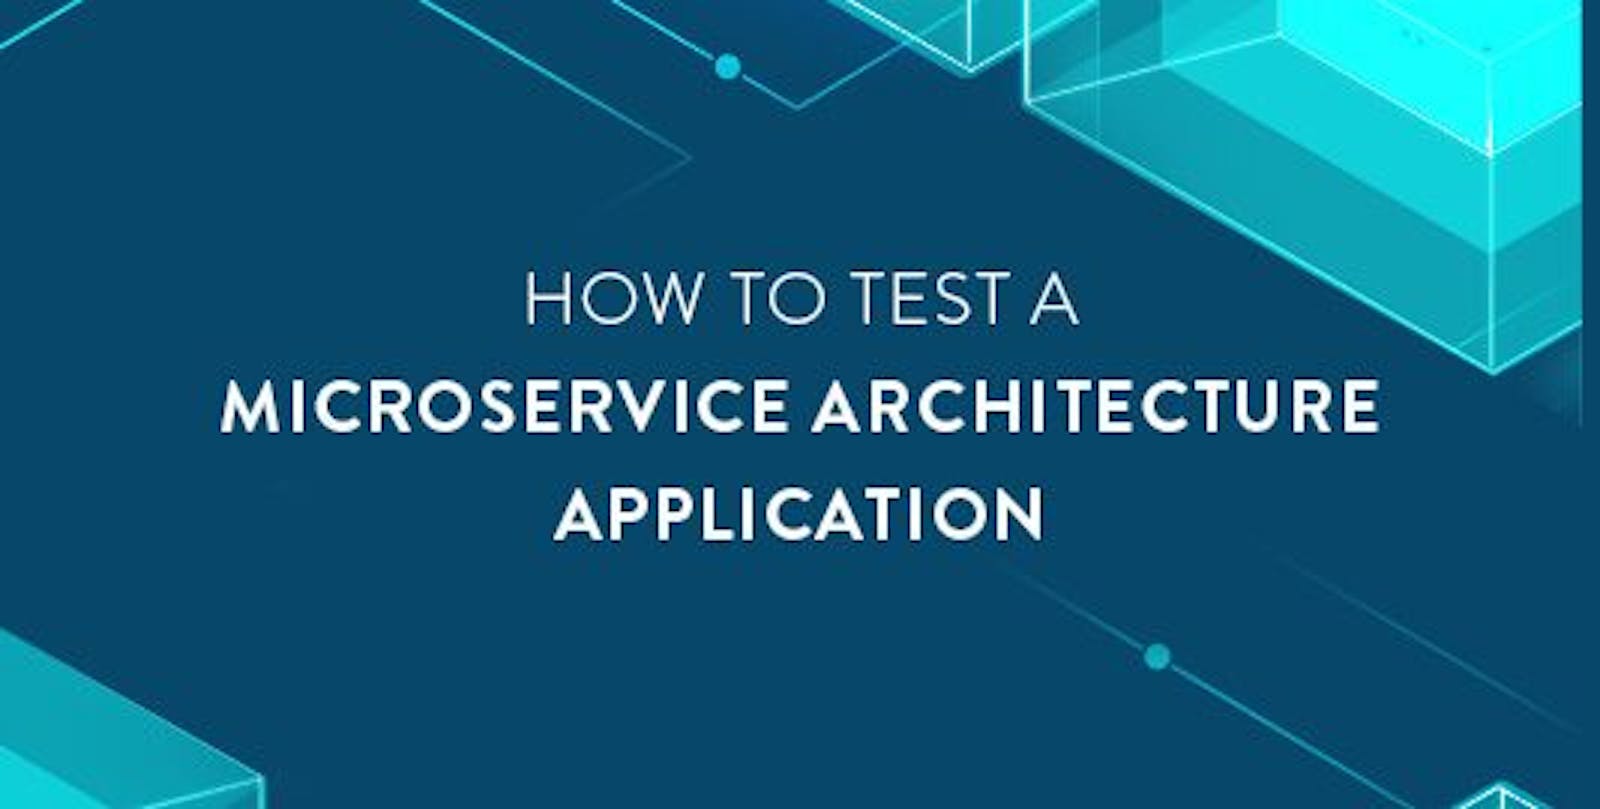 How to Test a Microservice Architecture Application